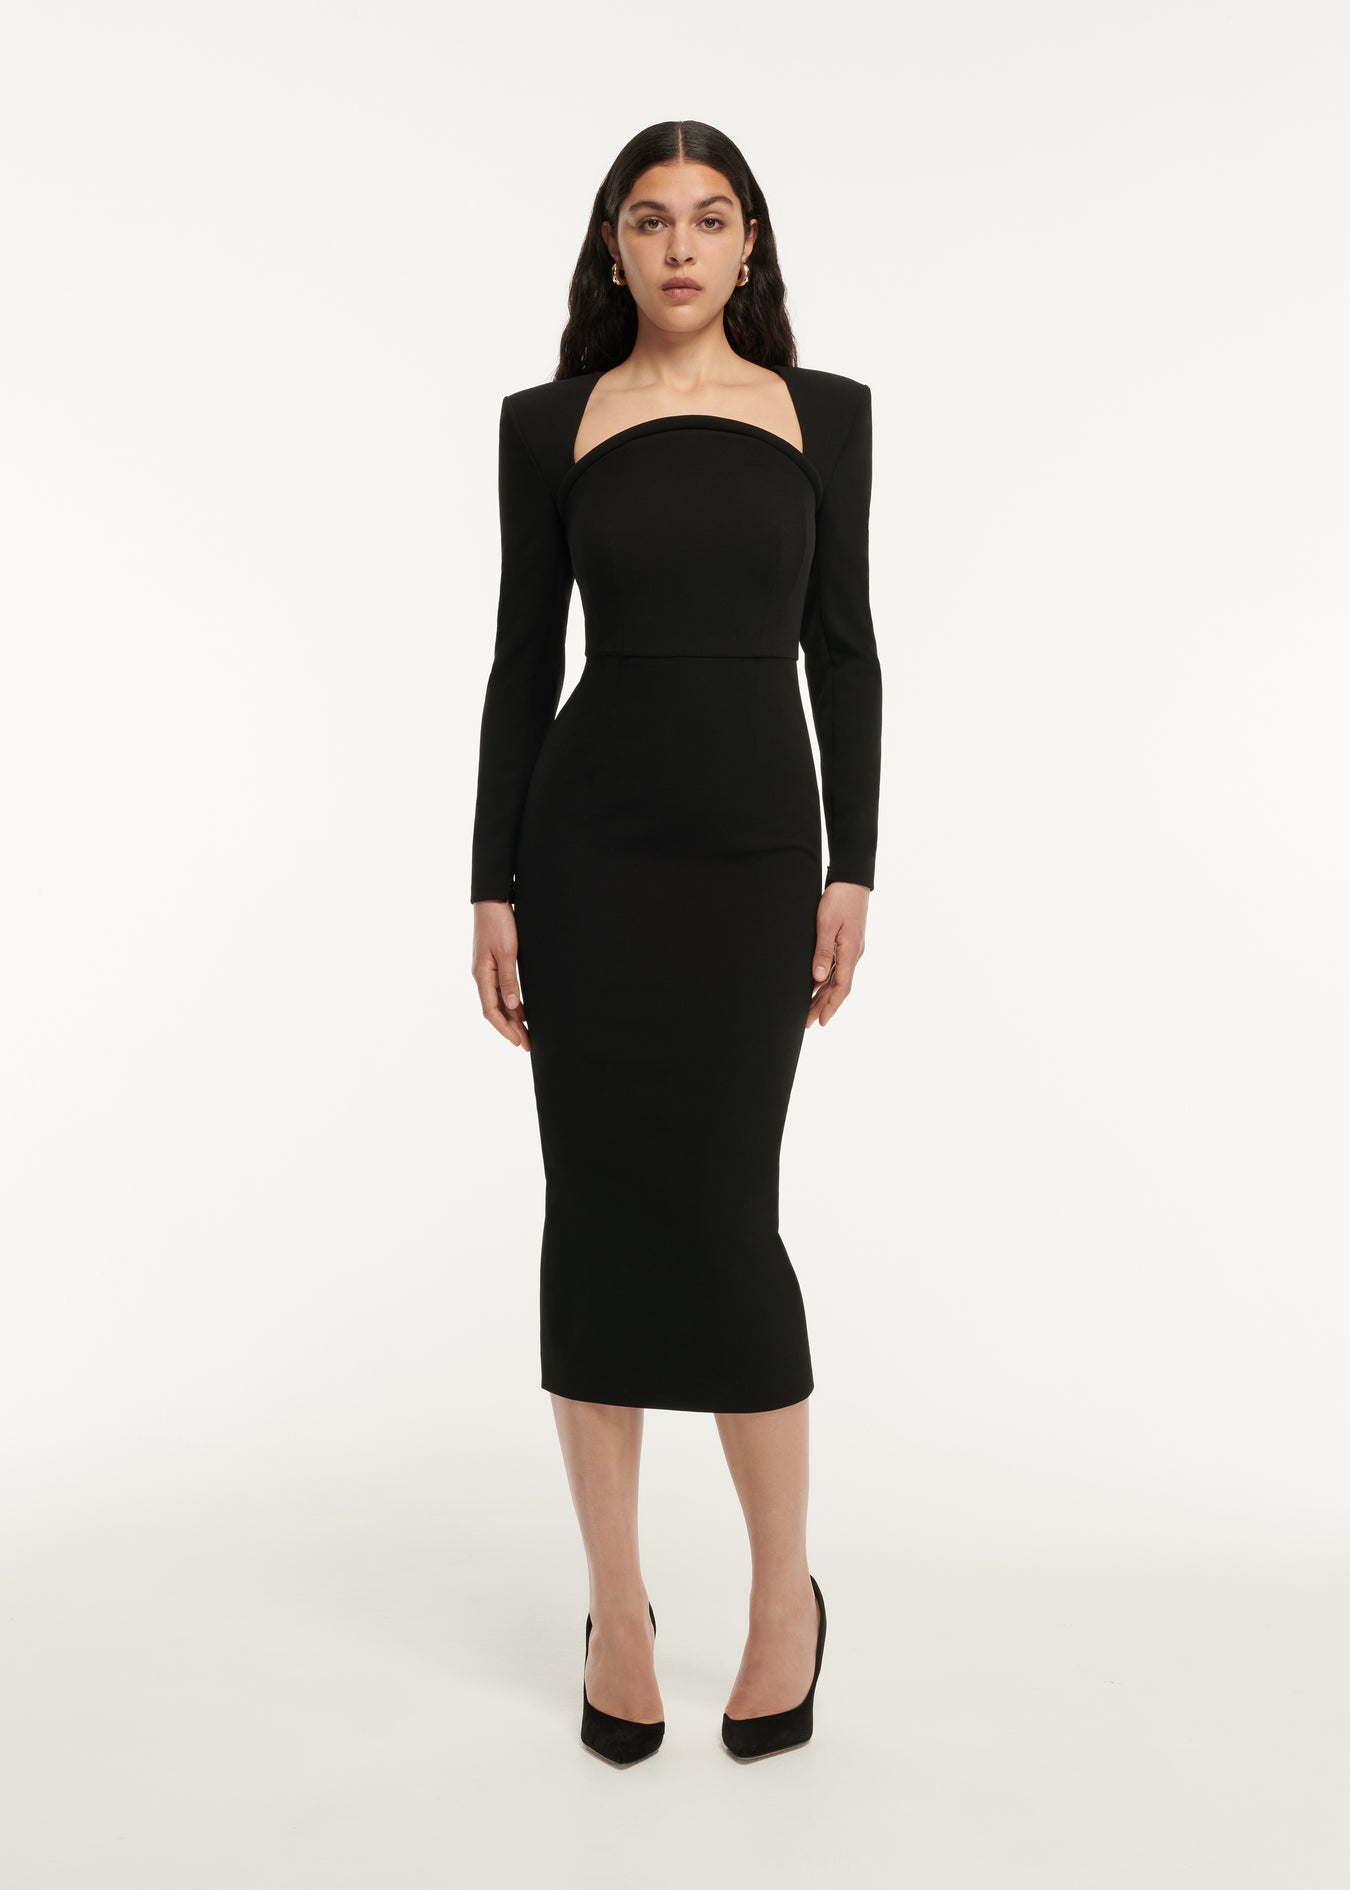 A woman wearing the Long Sleeve Curved Stretch Cady Midi Dress